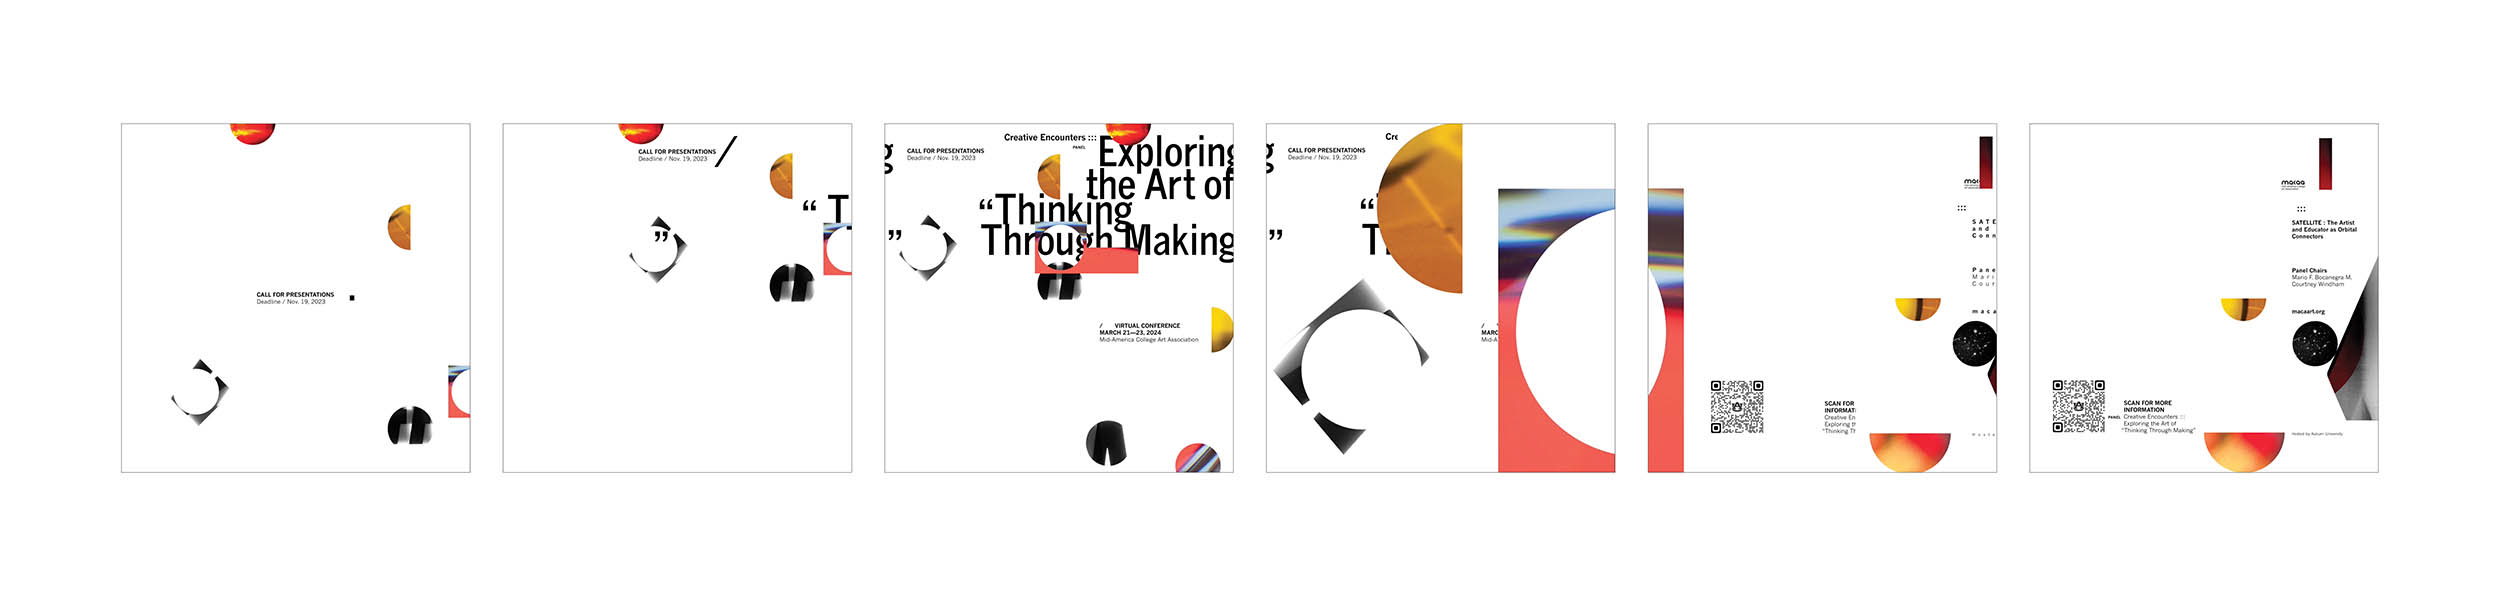 Animated poster design for "Creative Encounters: Exploring the Art of 'Thinking Through Making'" by Courtney Windham and Mario Bocanegra